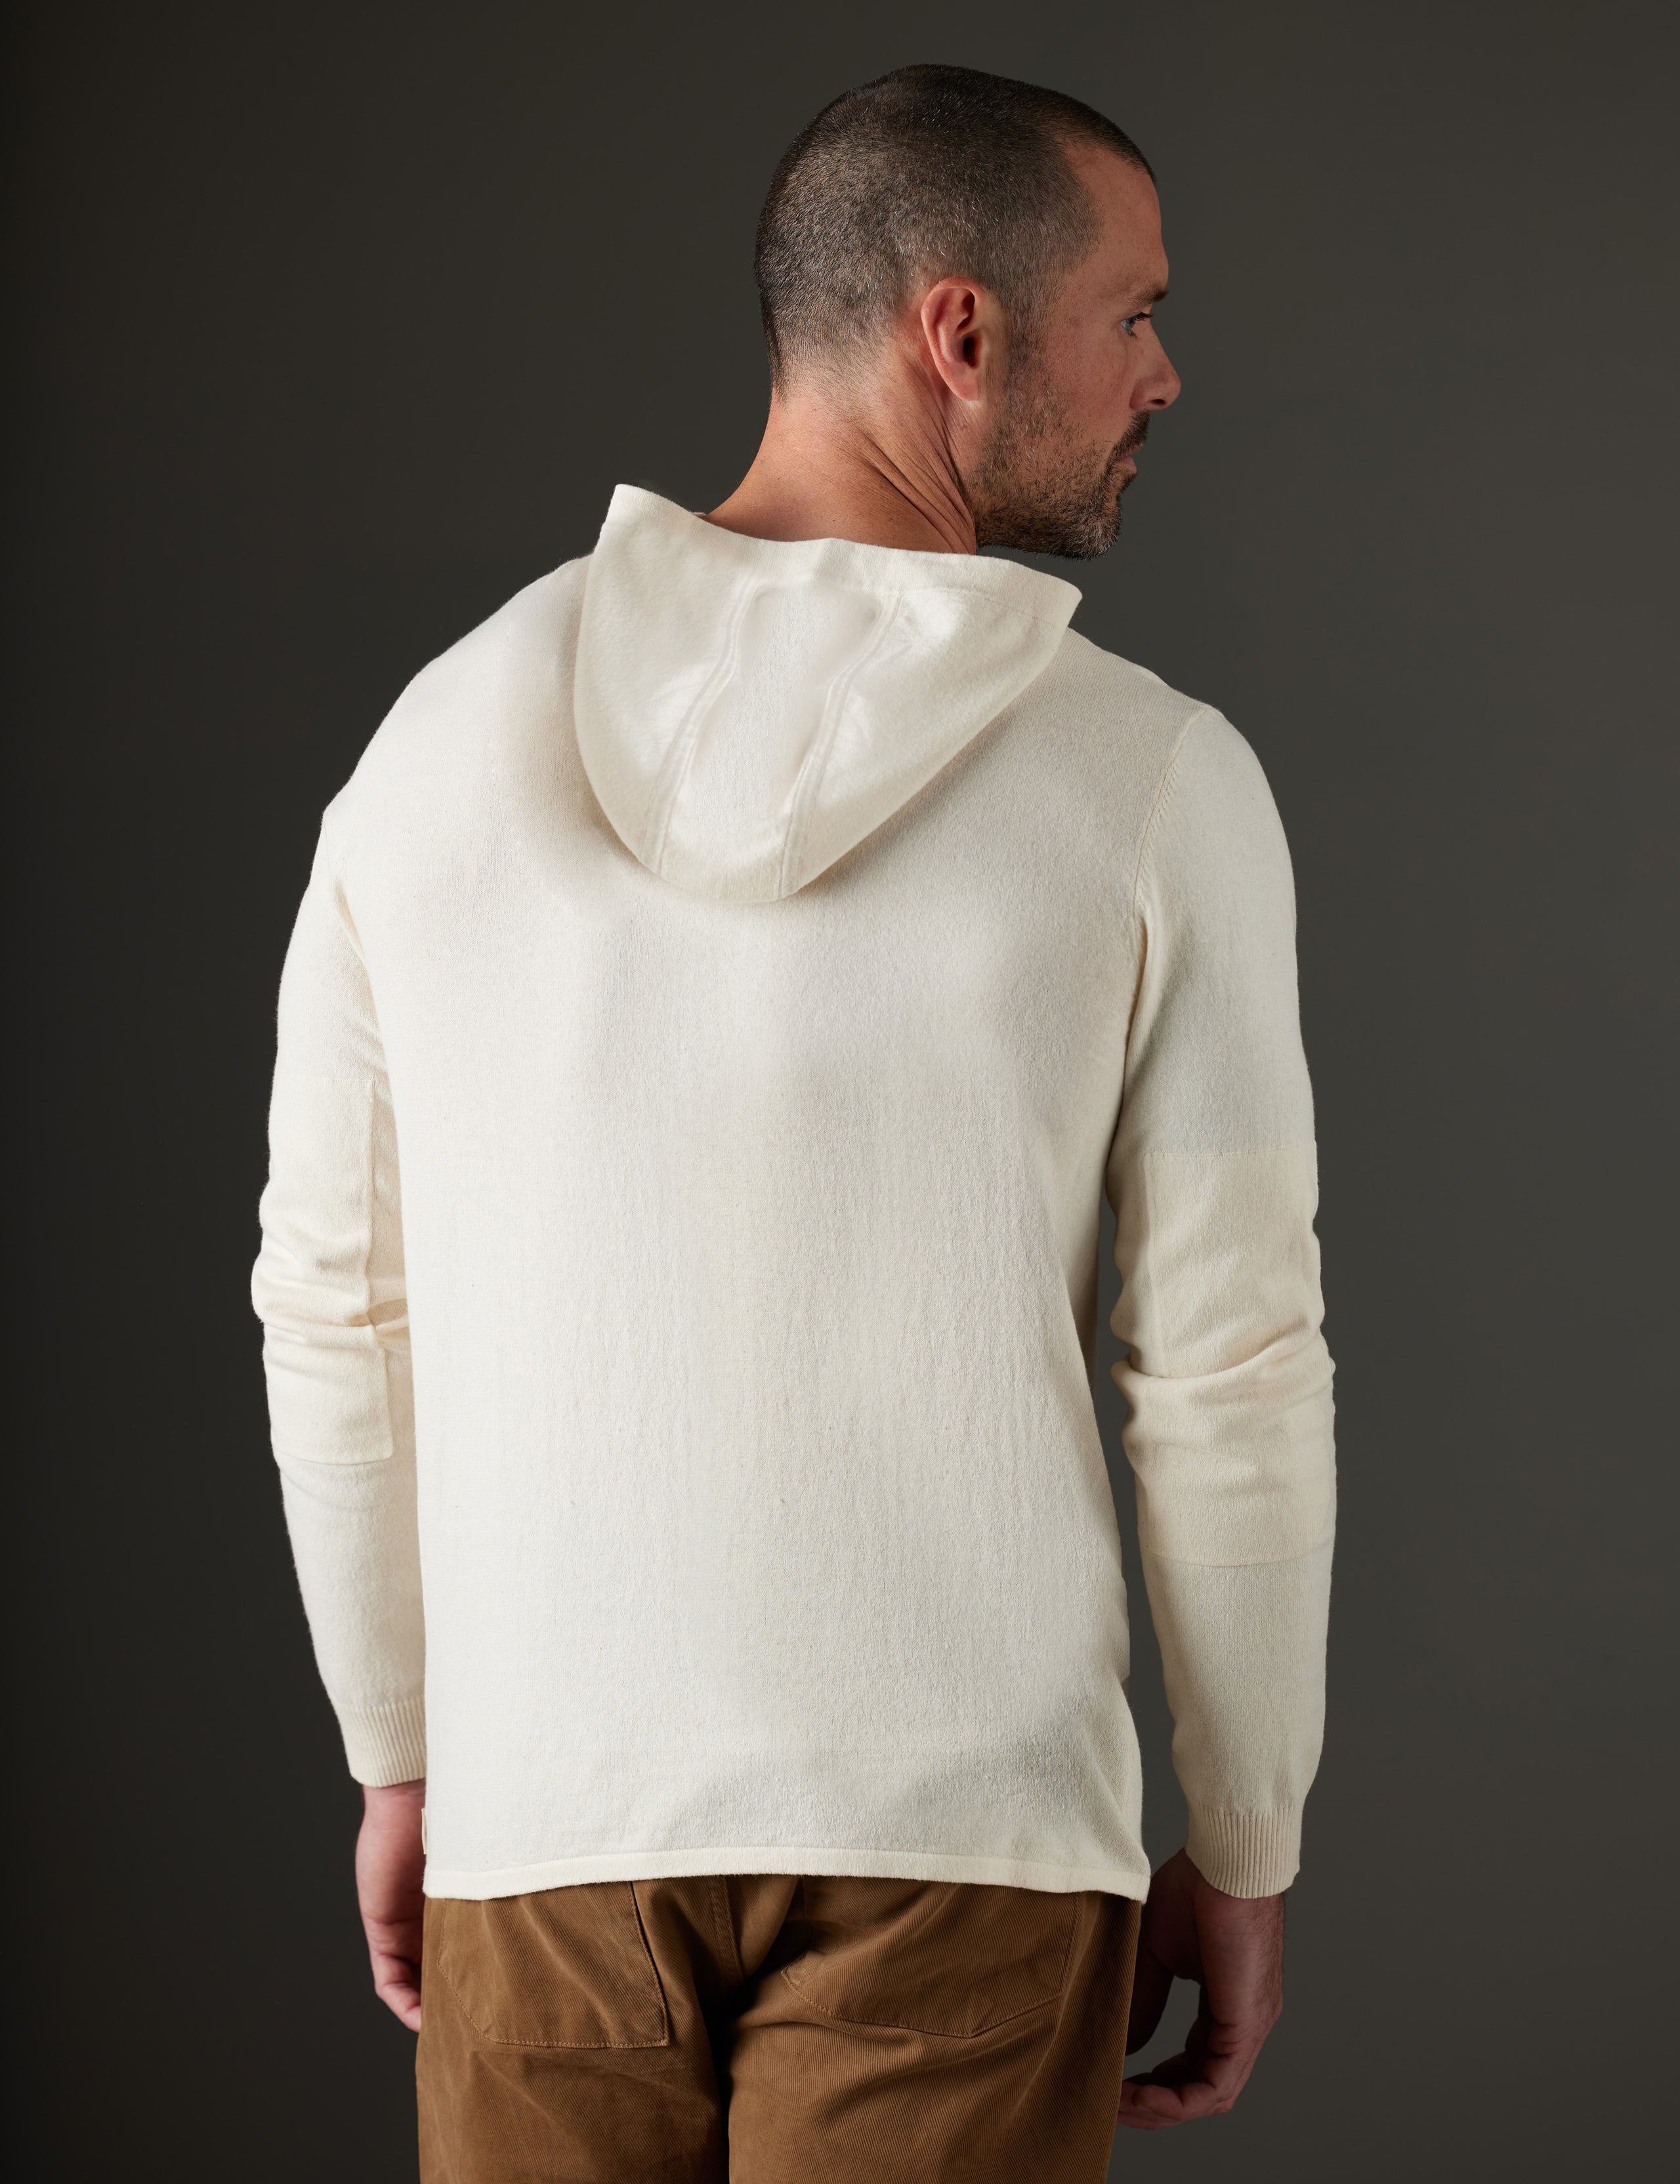 Man wearing beige hooded sweater from AETHER Apparel